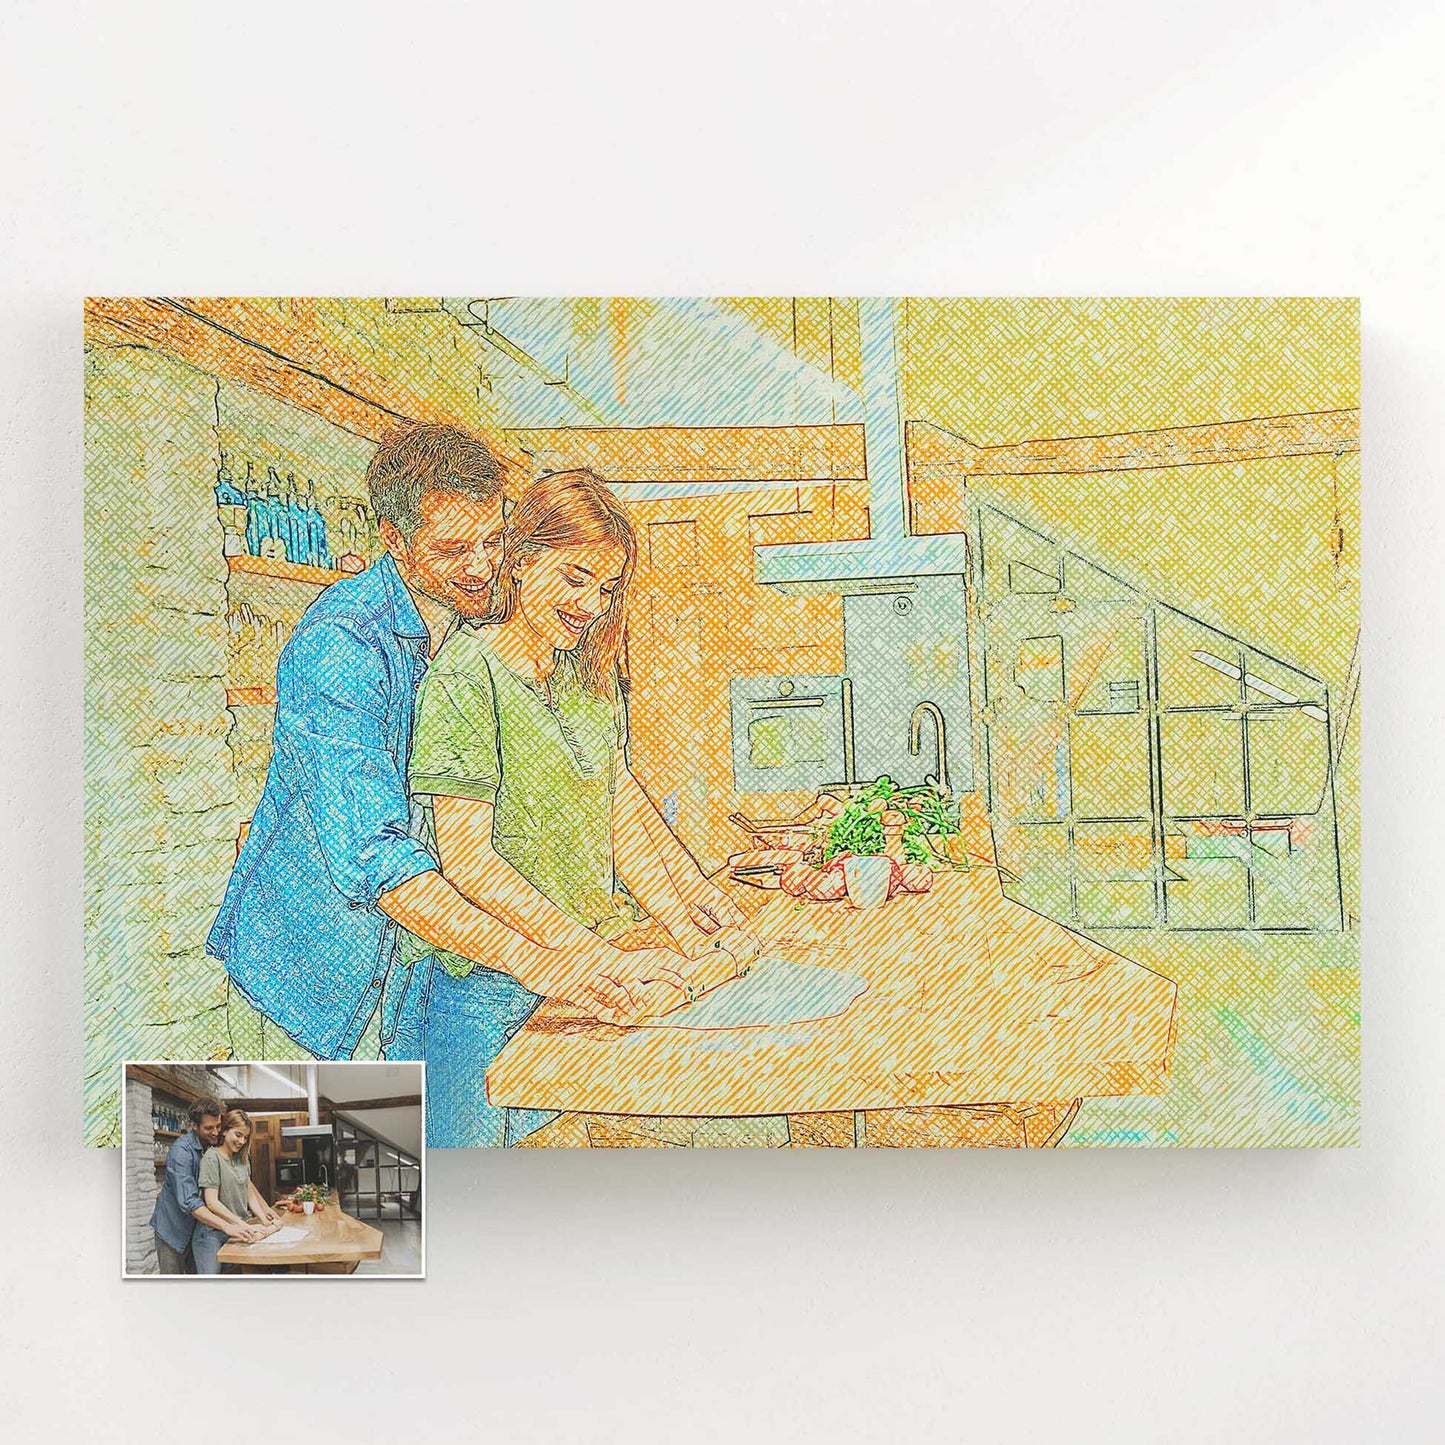 Celebrate your precious memories with a Personalised Drawing Crosshatch Canvas. Your photo is transformed into a vibrant and detailed artwork, meticulously hand-drawn with crosshatch strokes. Printed on a handmade woven canvas